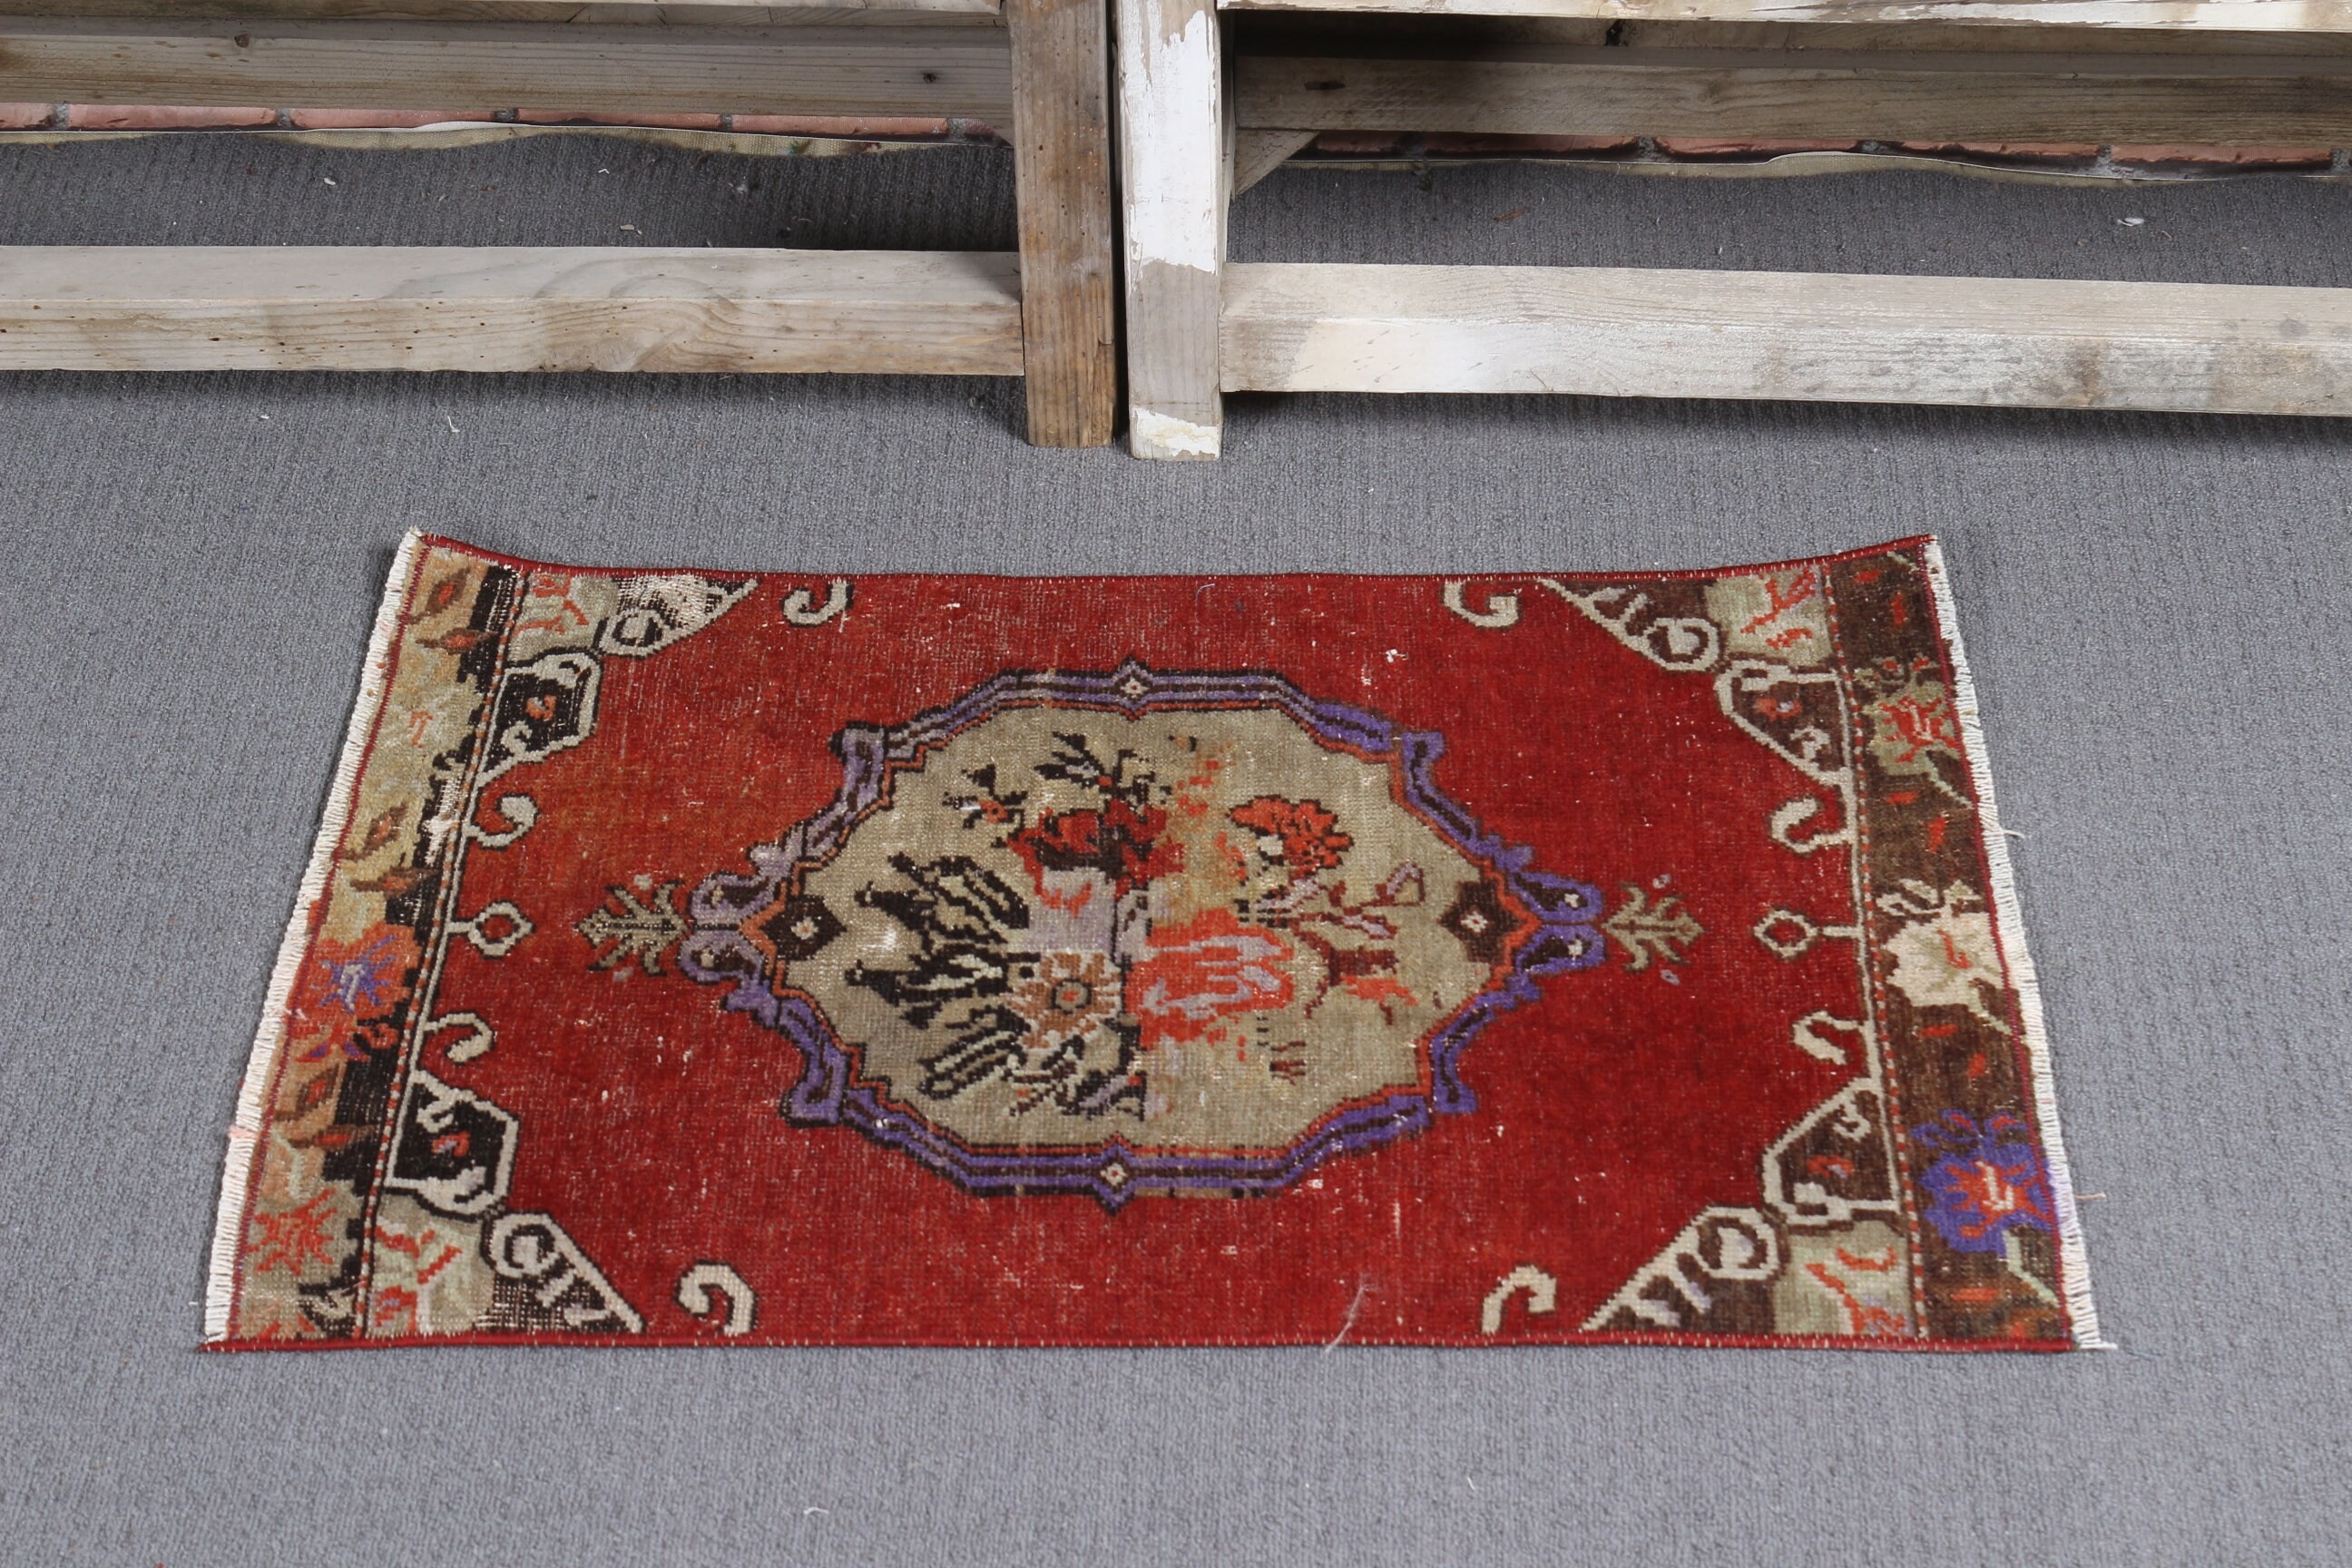 Door Mat Rugs, Vintage Rugs, Red Anatolian Rugs, Cool Rug, Turkish Rugs, 1.5x2.4 ft Small Rugs, Wall Hanging Rug, Home Decor Rug, Cute Rugs